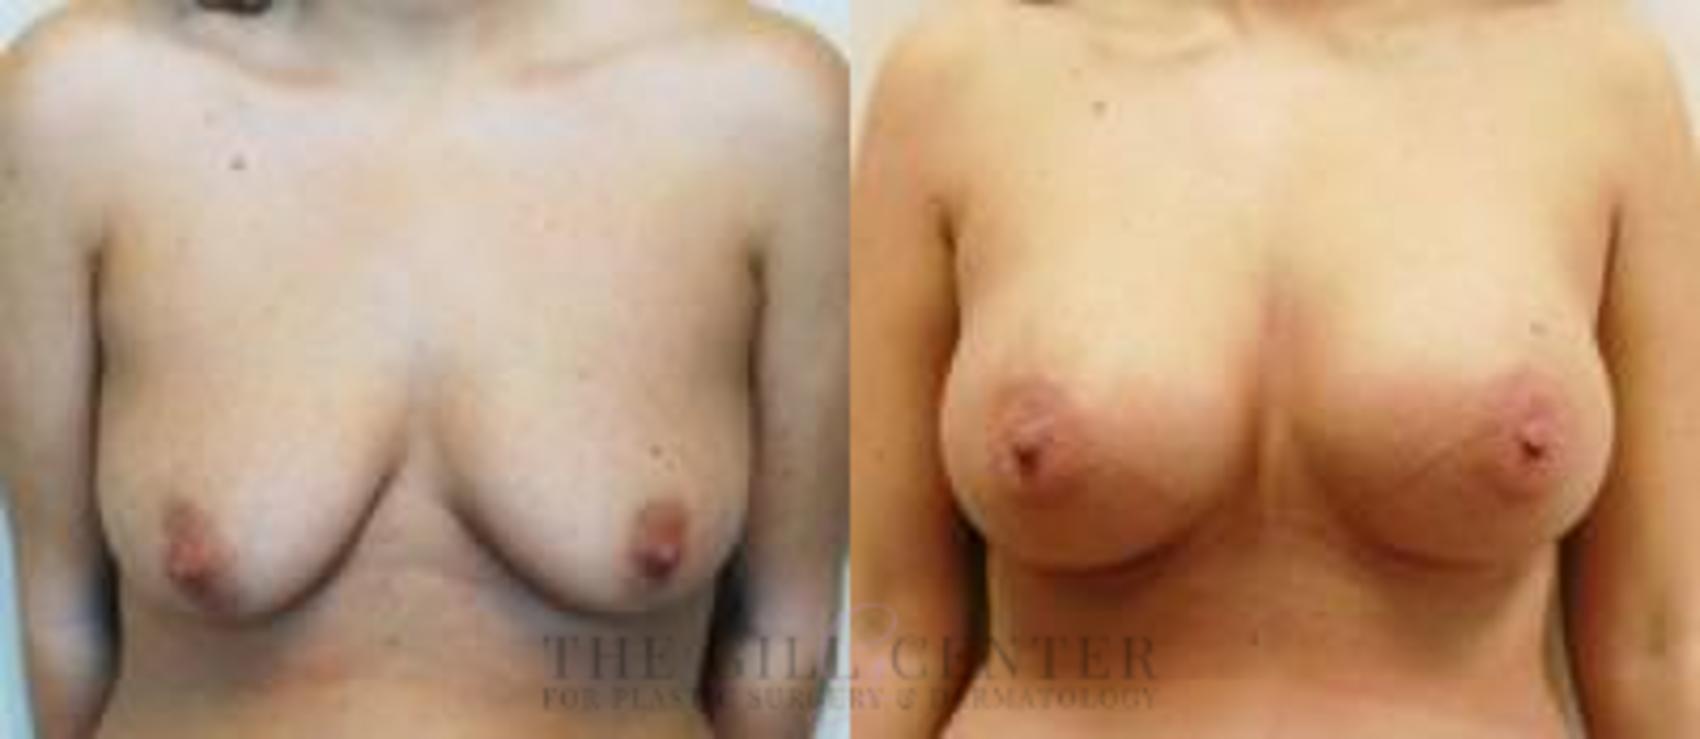 Breast Augmentation Case 63 Before & After Front | The Woodlands, TX | The Gill Center for Plastic Surgery and Dermatology